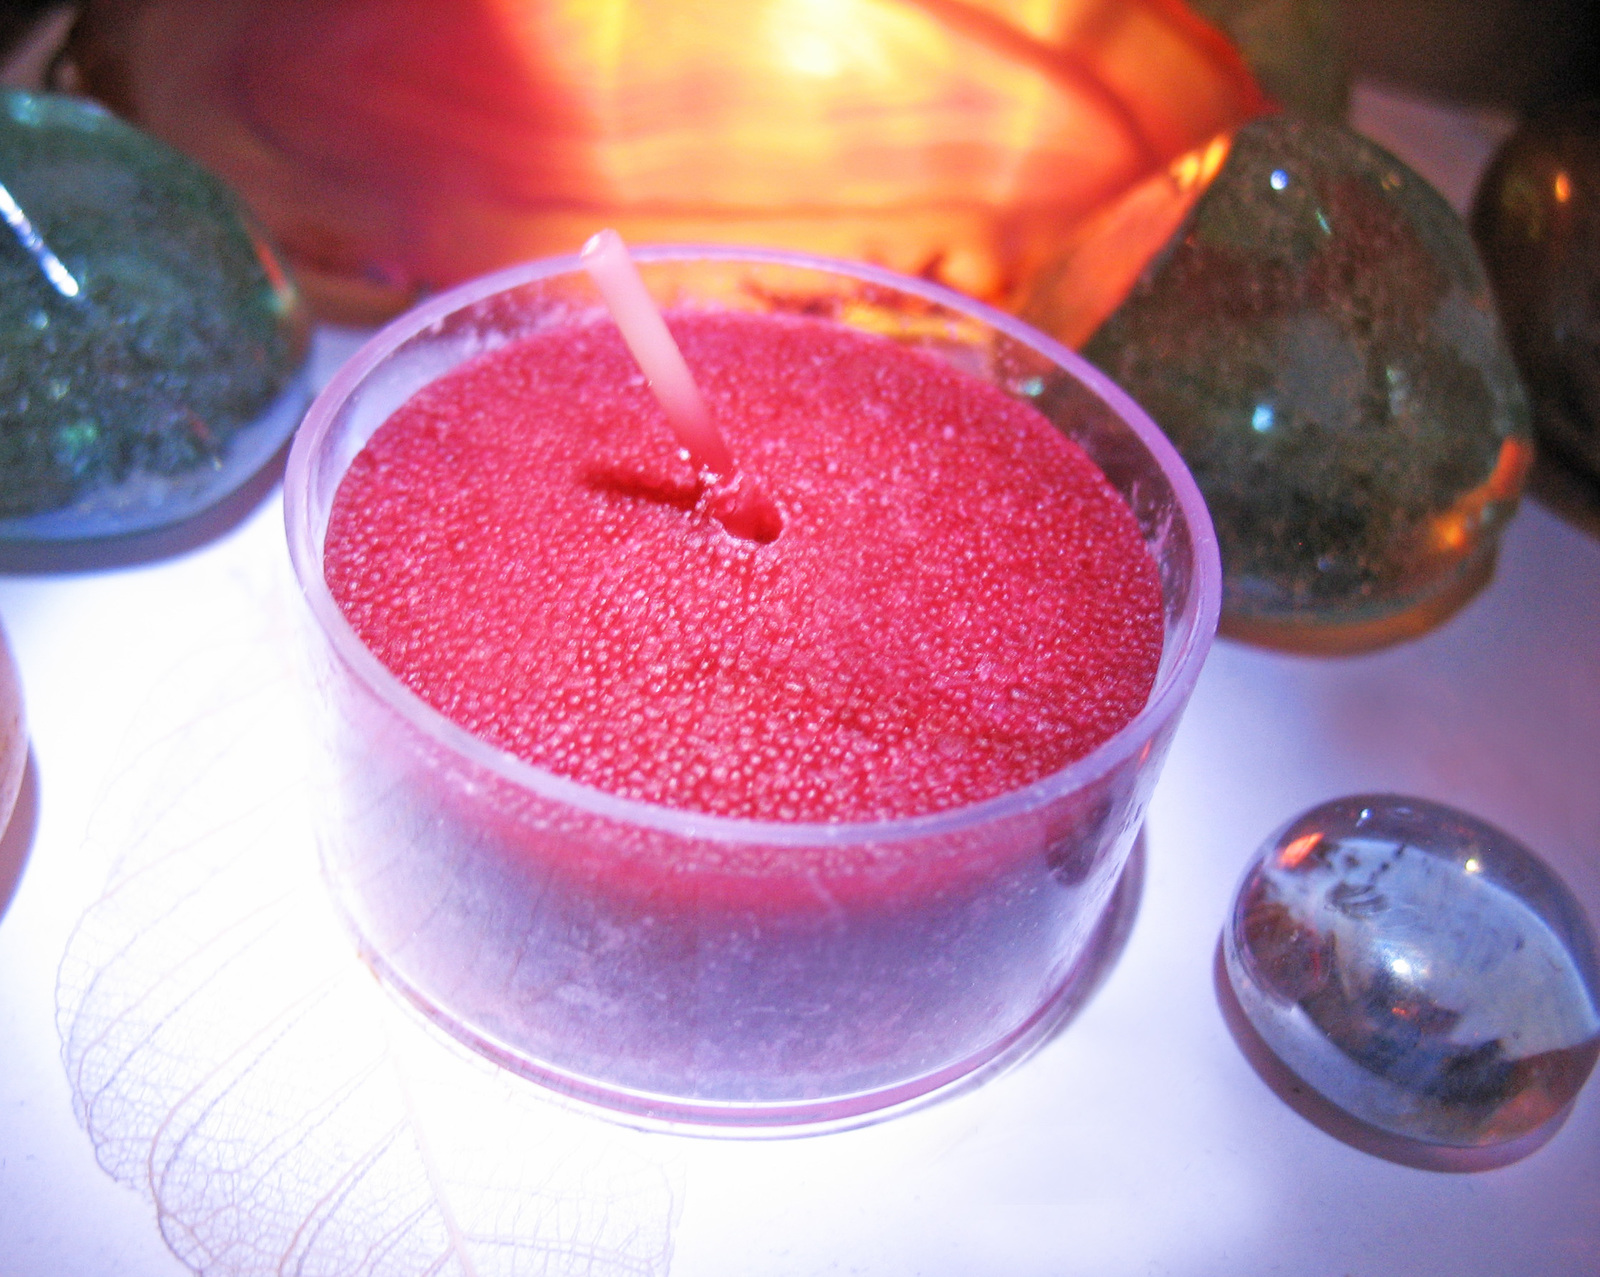 Haunted FREE with ITEM order CANDLE 3X ATTRACT LOVE POTENT MAGICK WITCH Cassi - $14.00